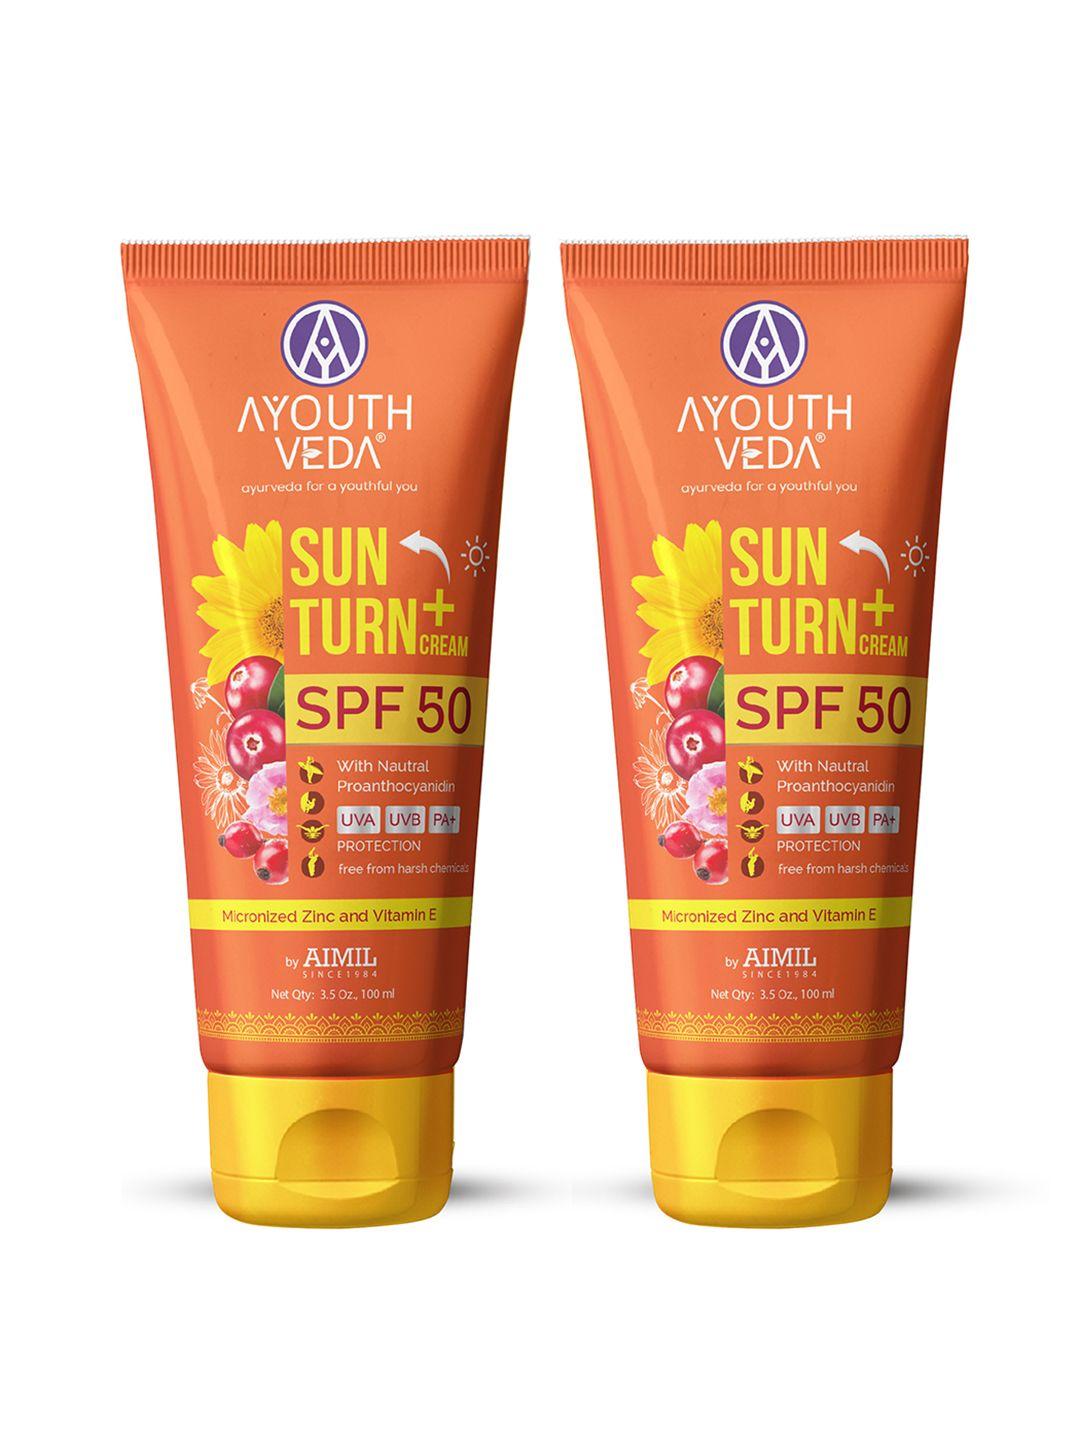 ayouthveda sun turn set of 2 cream spf 50 with uva - uvb & pa++ protection - 100g each